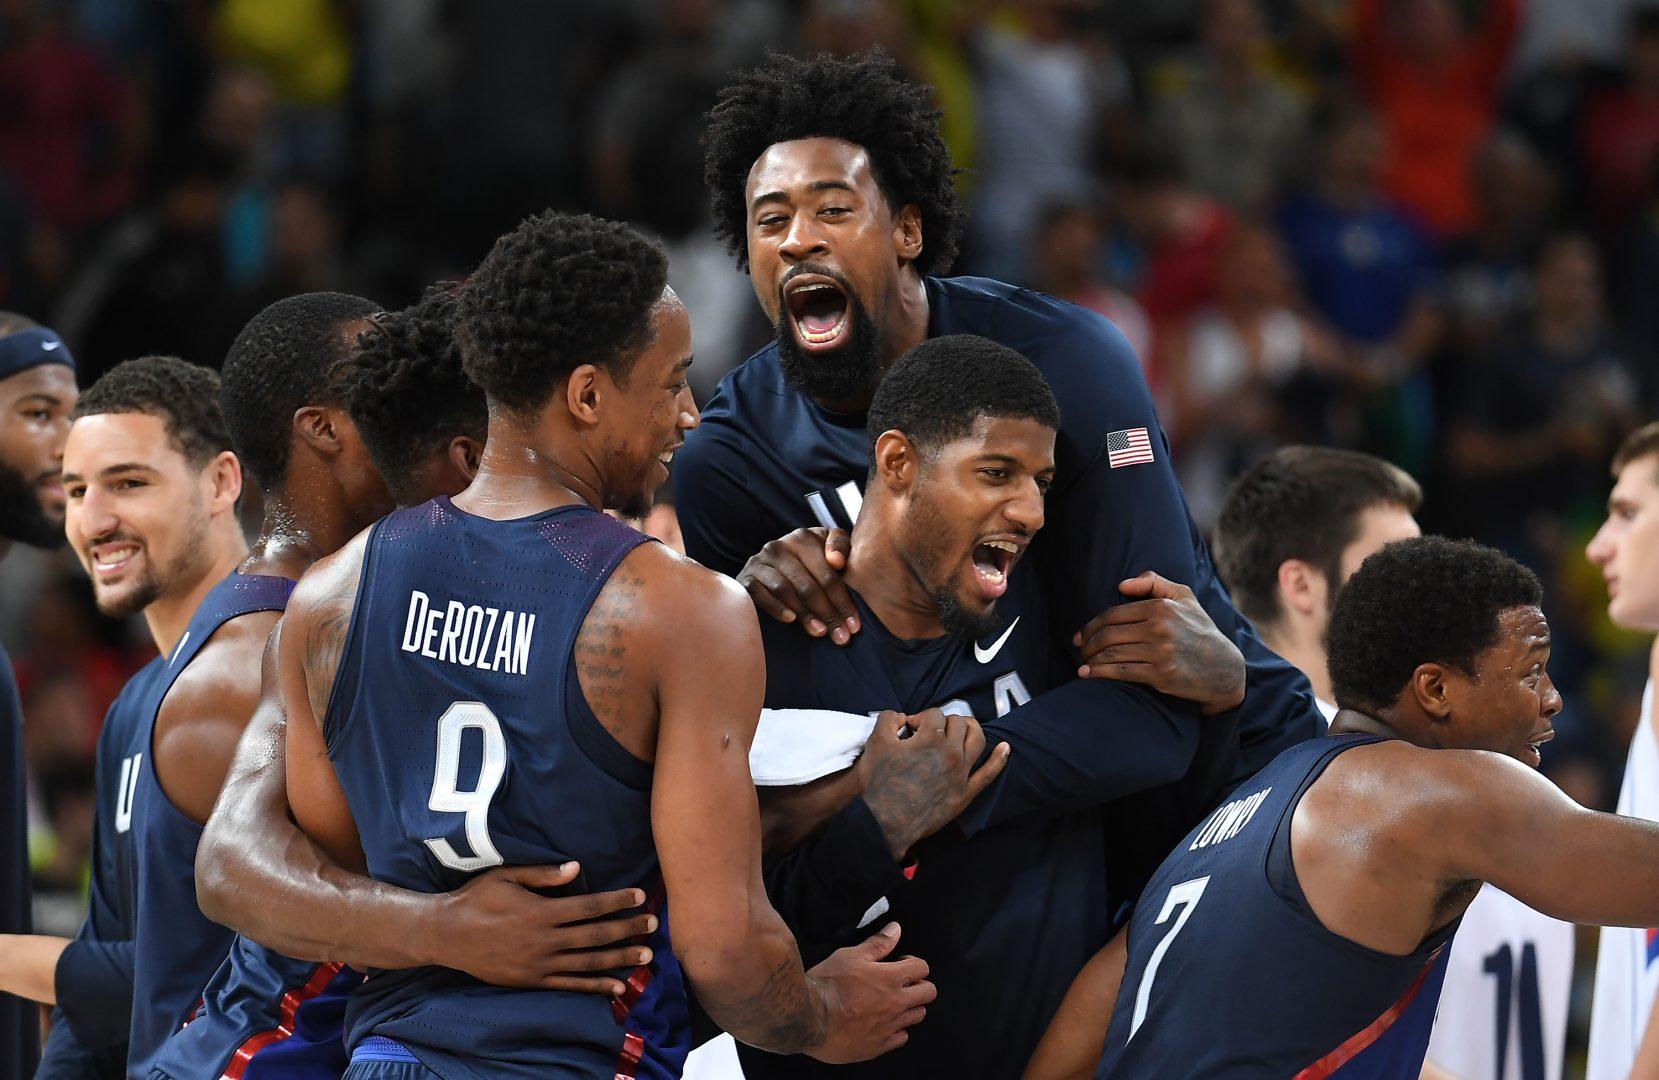 Former Bulldog Paul George celebrates with teammates after winning the gold medal on Sunday, Aug. 21, 2016 at the Rio 2016 Olympics in Brazil. (Wally Skalij/Los Angeles Times)